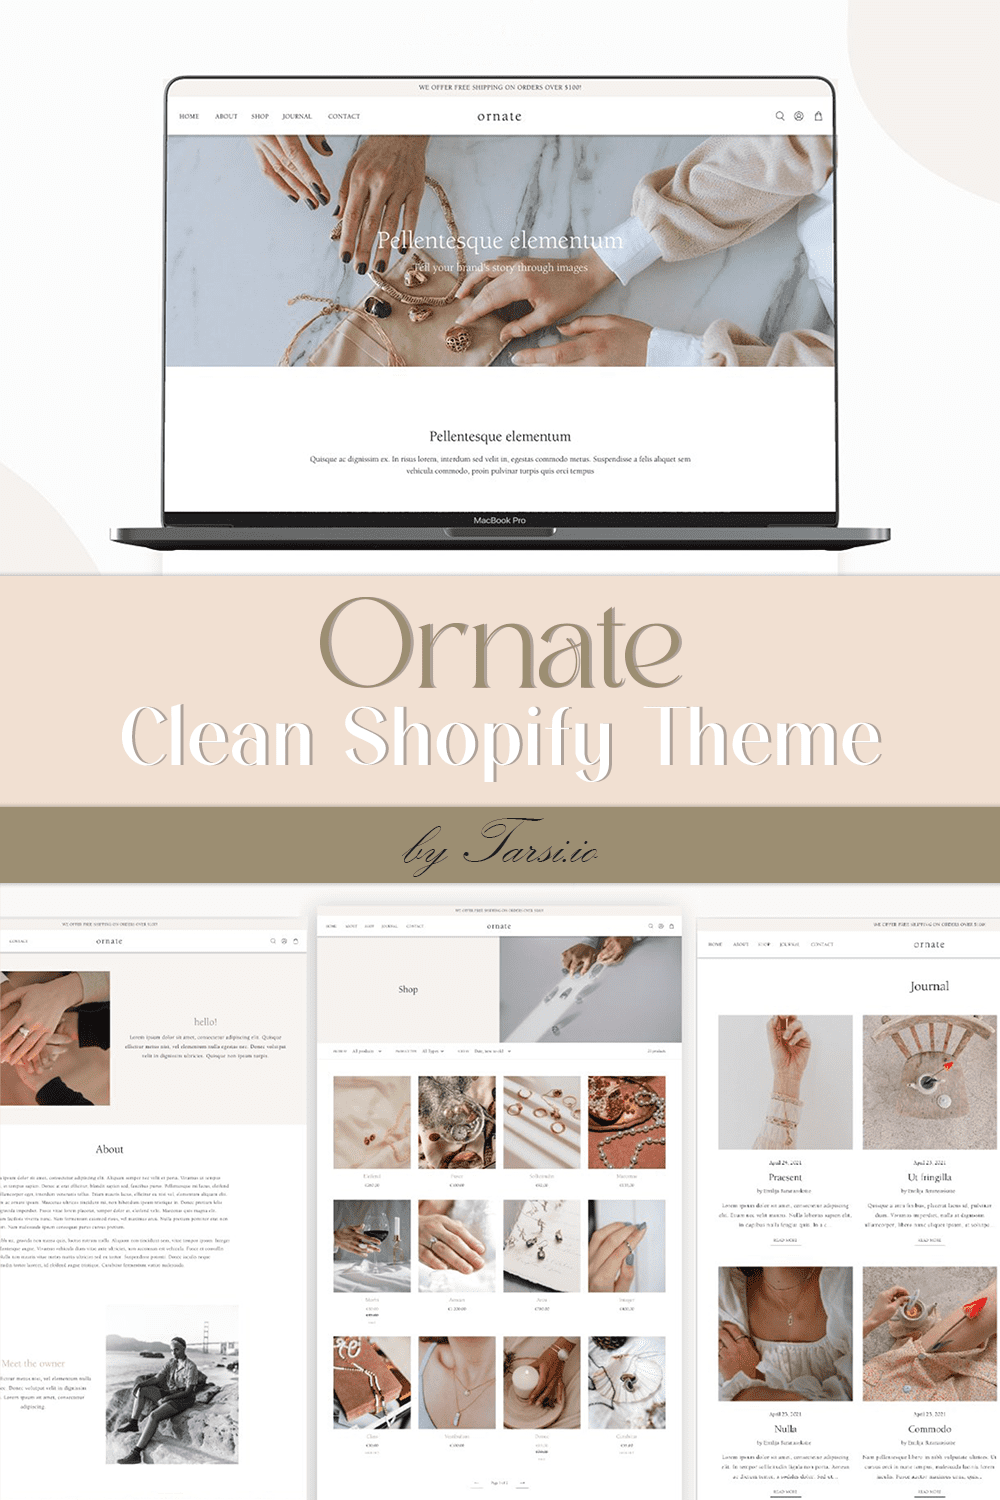 Collection of images of elegant Shopify theme in brown and white.